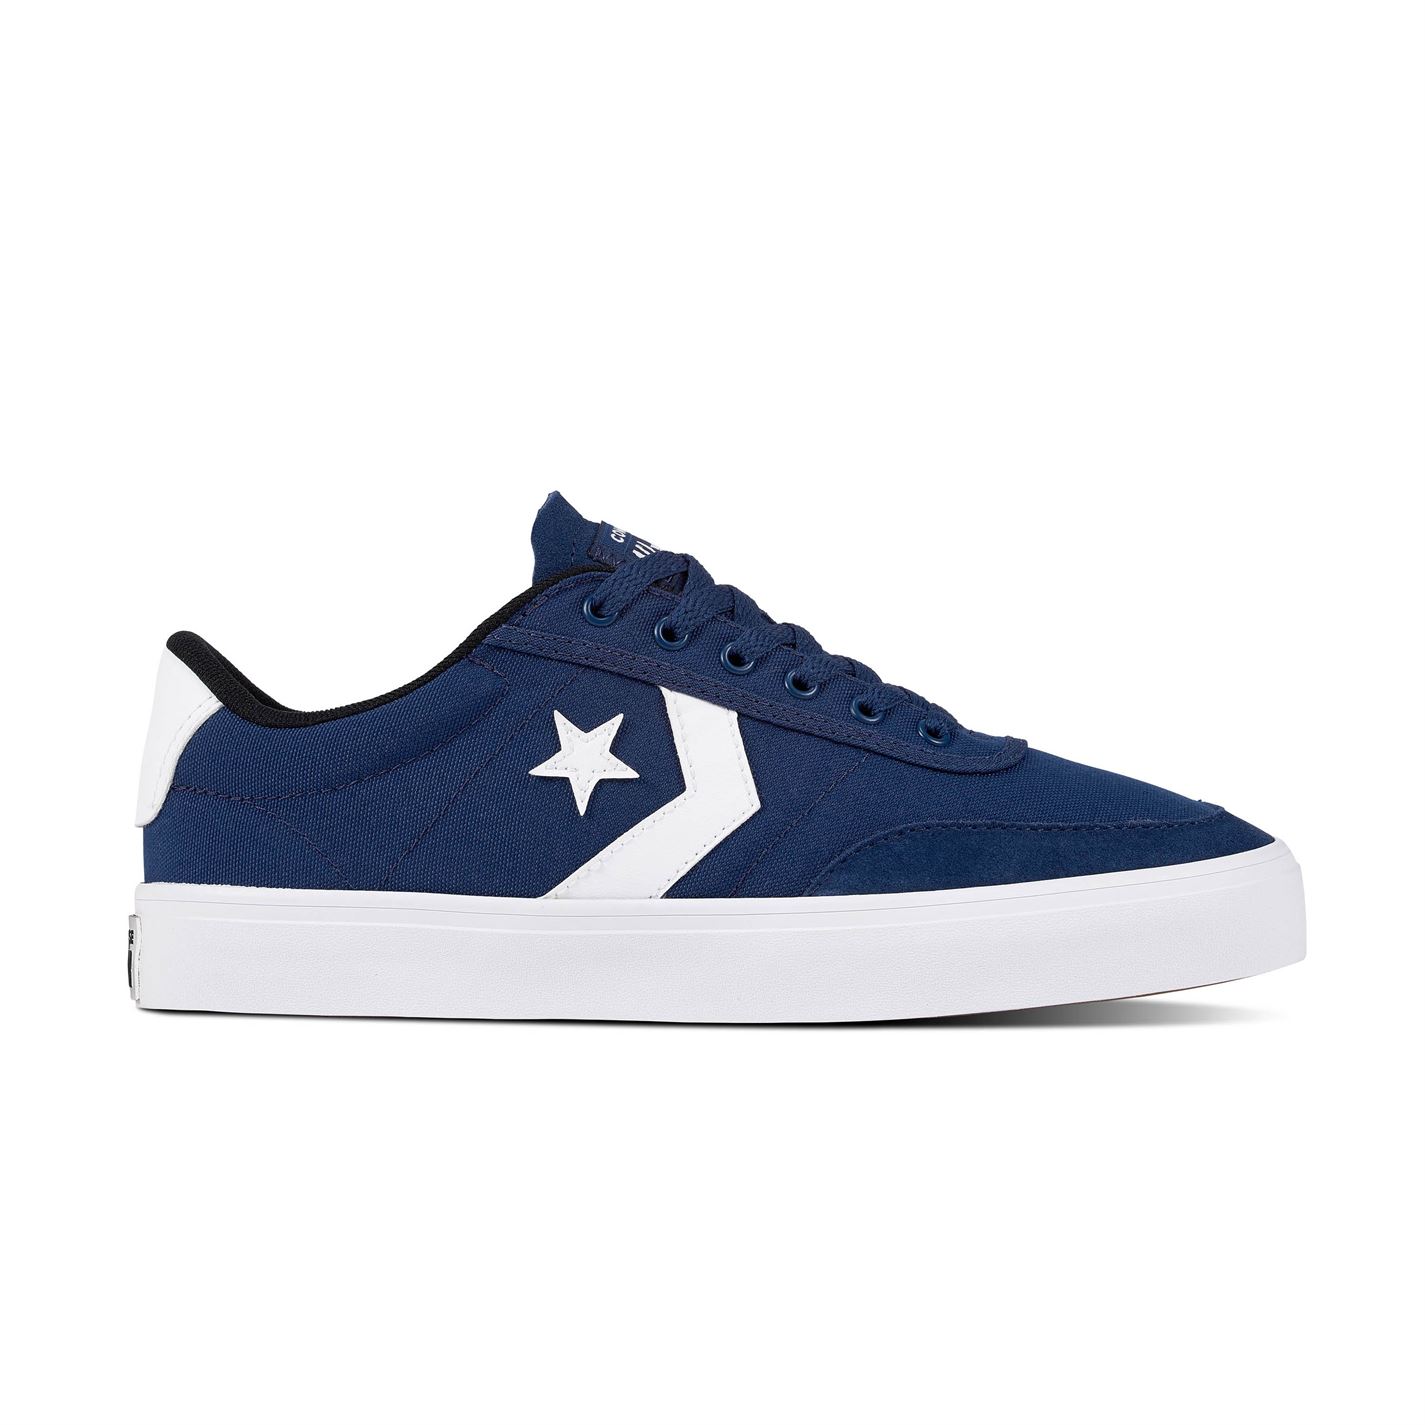 Converse Mens Navy/White Busy District